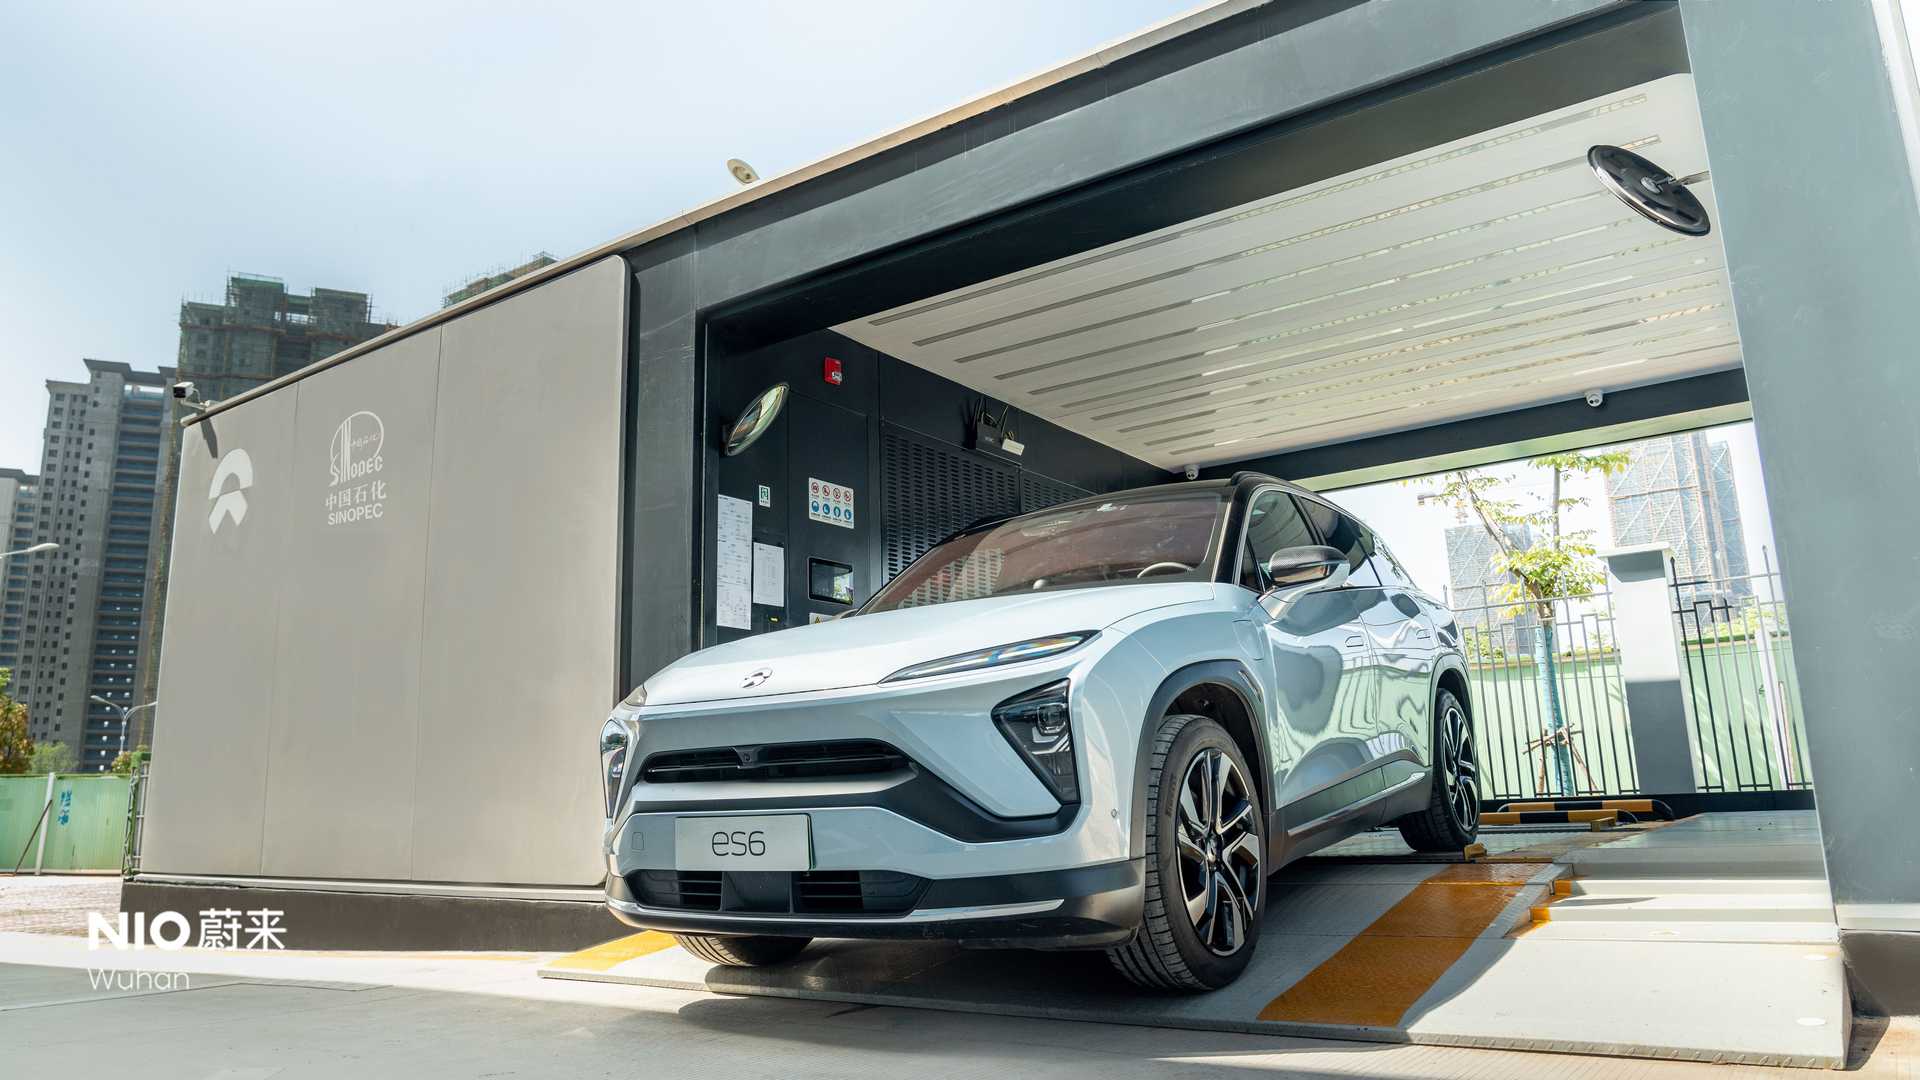 The 175th NIO battery swap station built by NIO and Sinopec in China